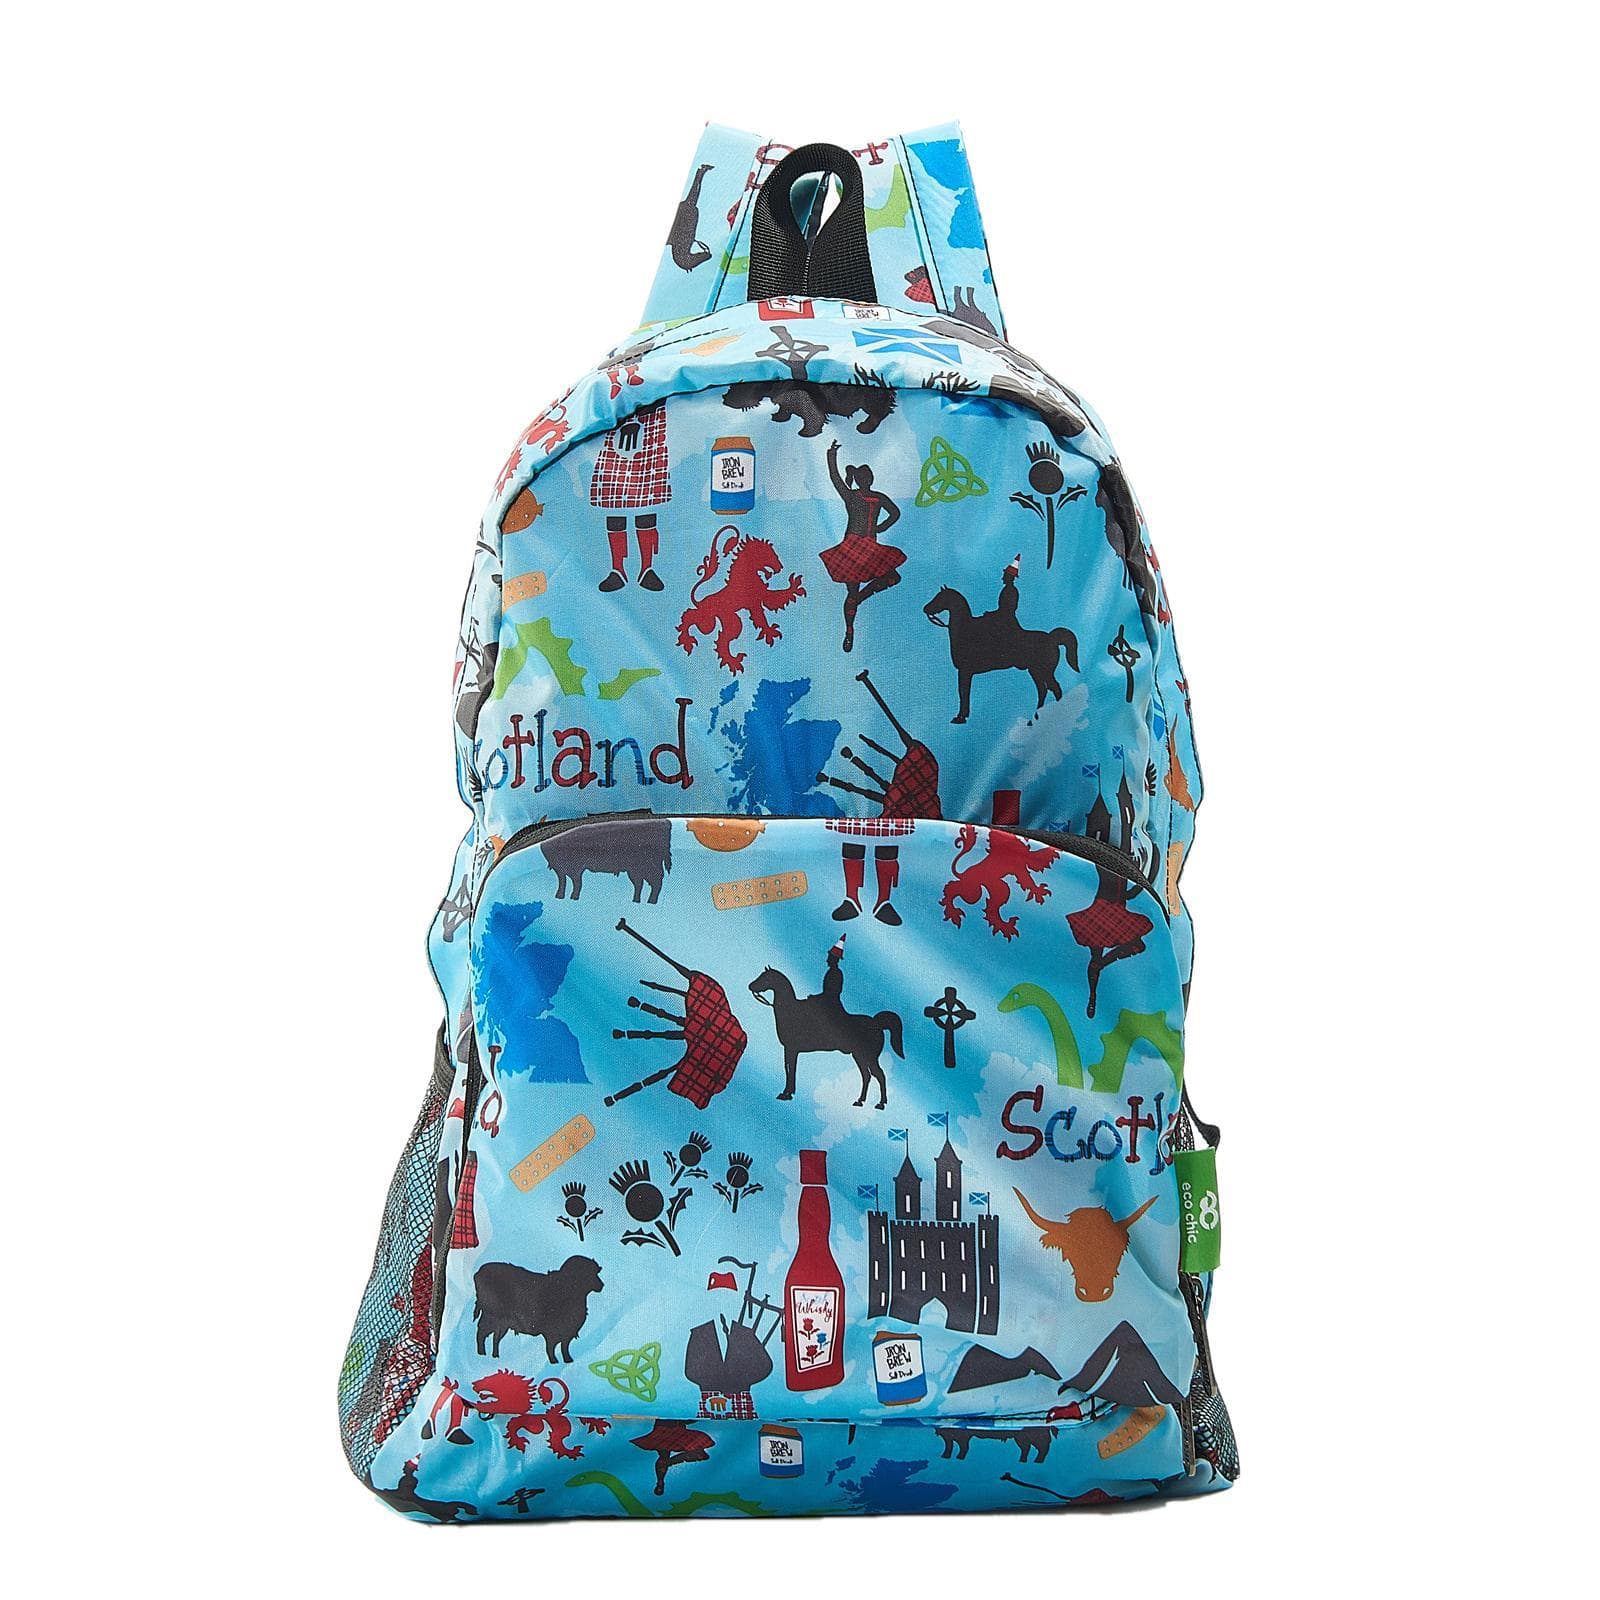 Eco Chic Eco Chic Lightweight Foldable Backpack Scottish Montage